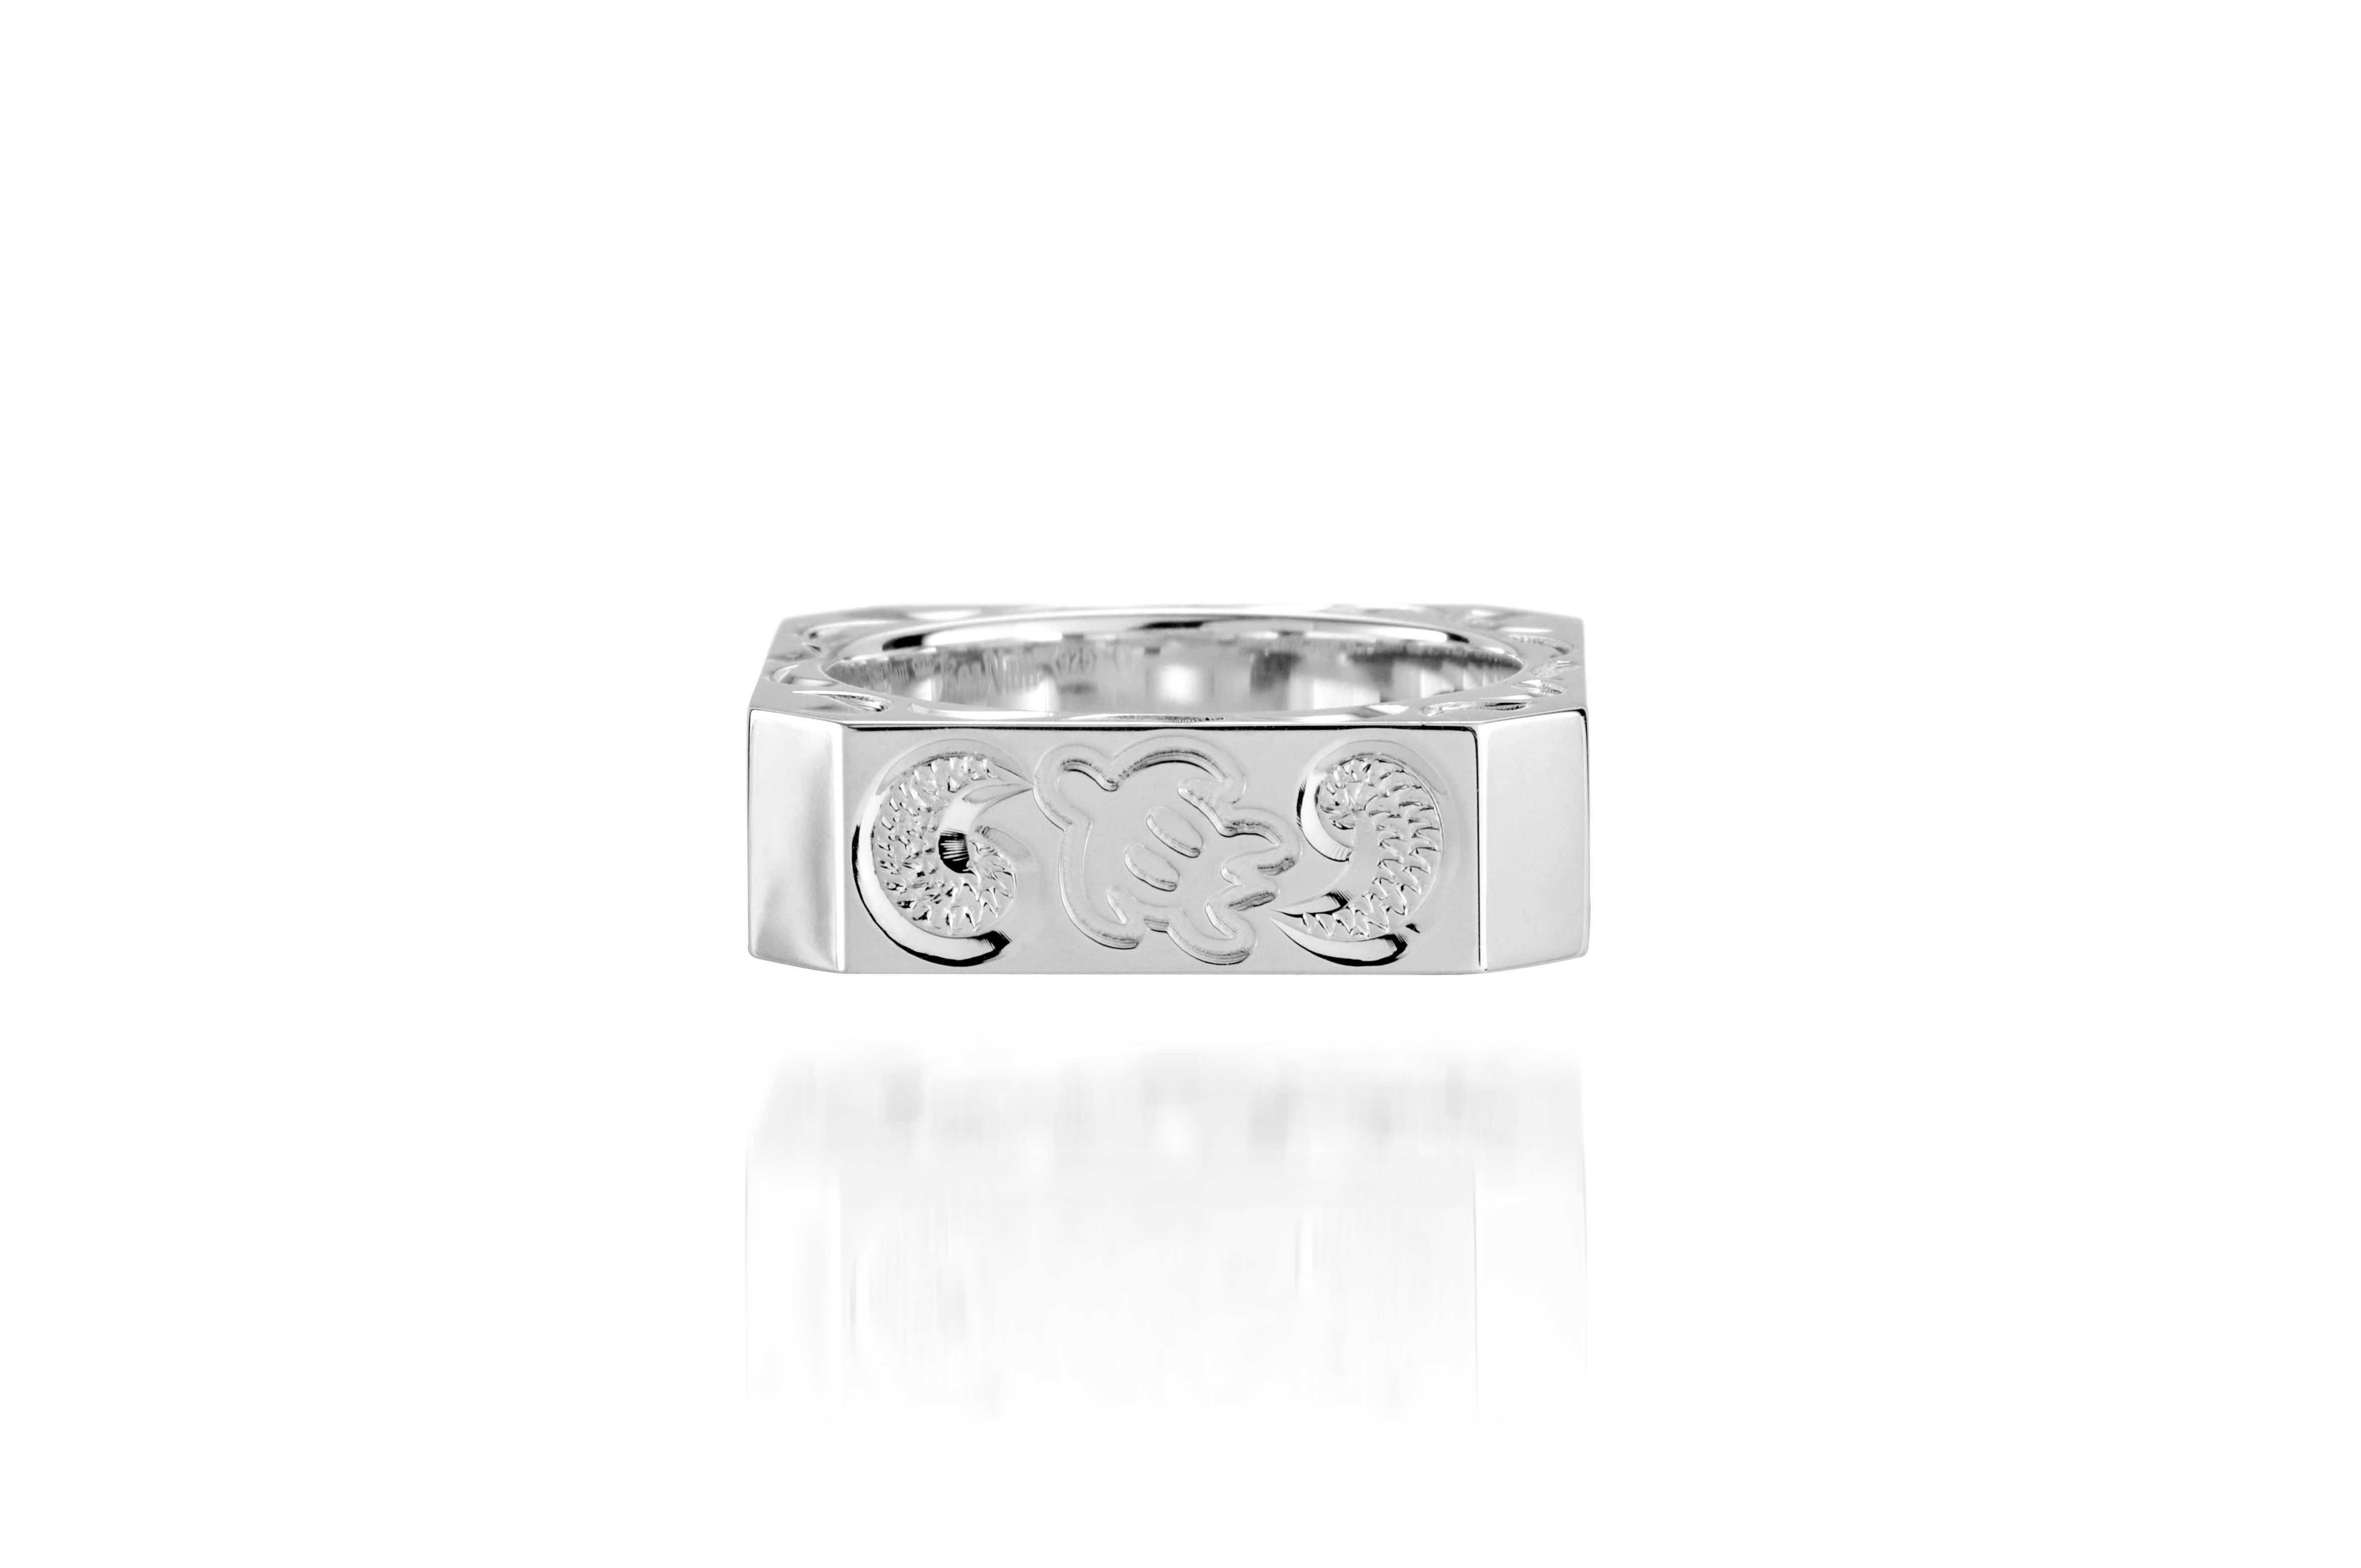 The picture shows a 925 sterling silver squared 8mm ring with hand engravings including a sea turtle.